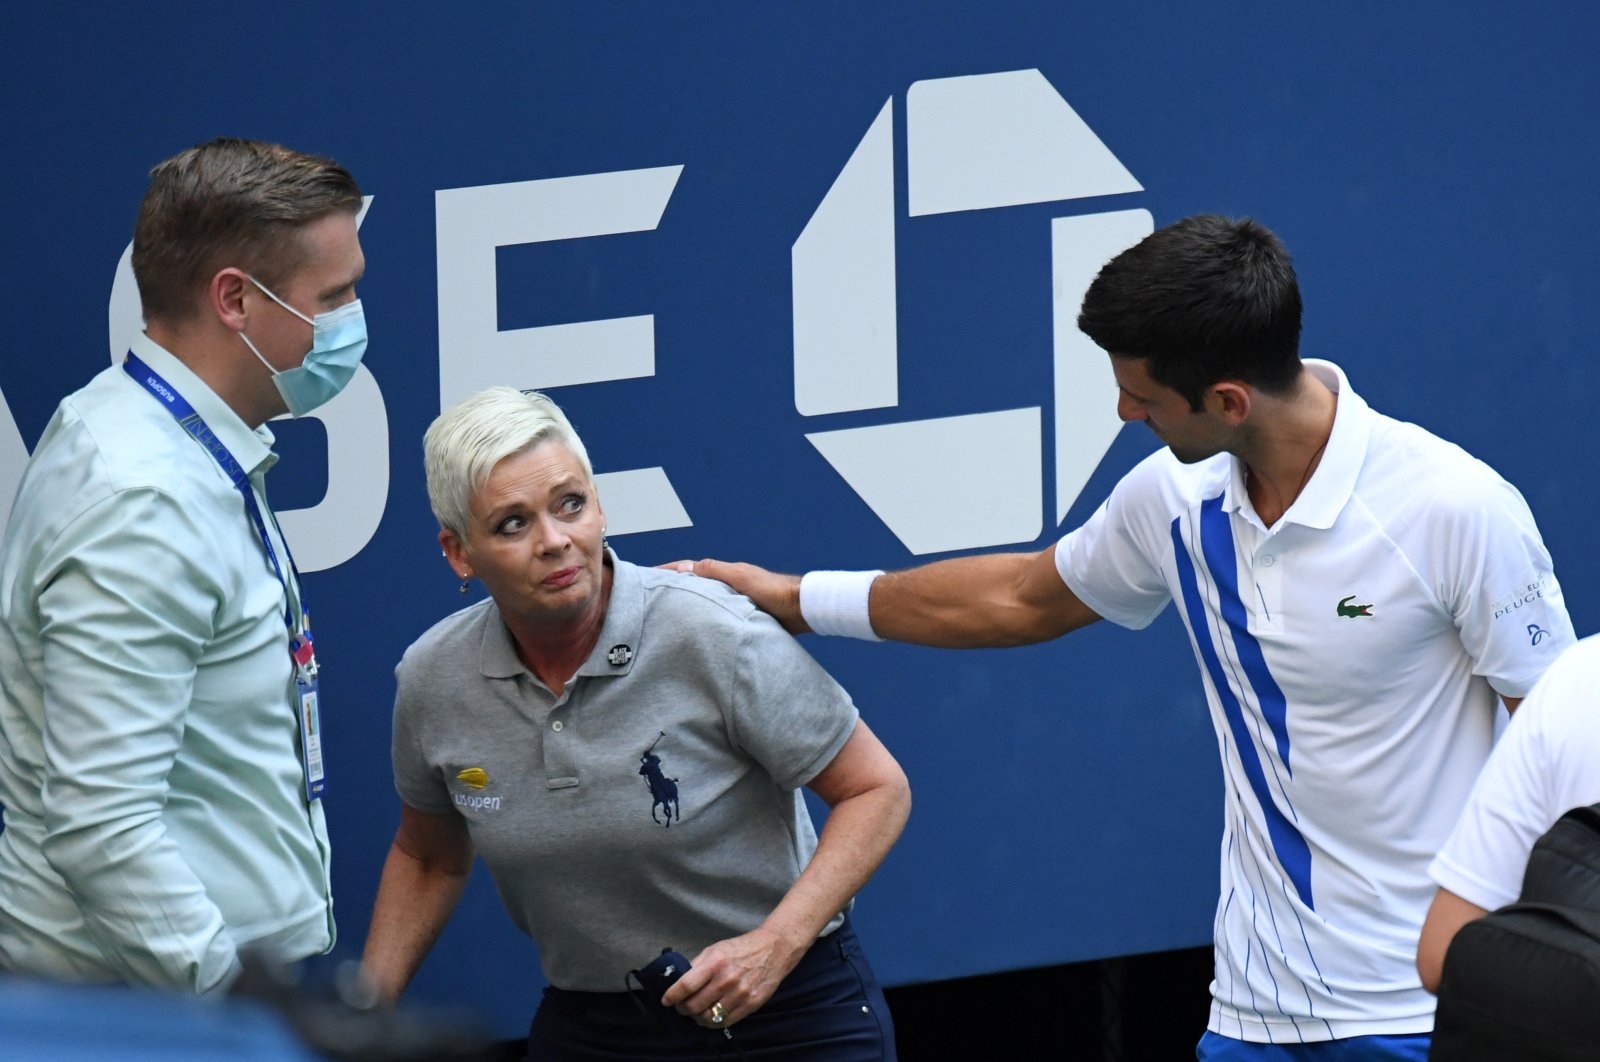 Novak Djokovic pats a line judge on the back after she was hit with a ball at the U.S. Open, New York City, New York, U.S., Sept. 7, 2020. (Reuters Photo)